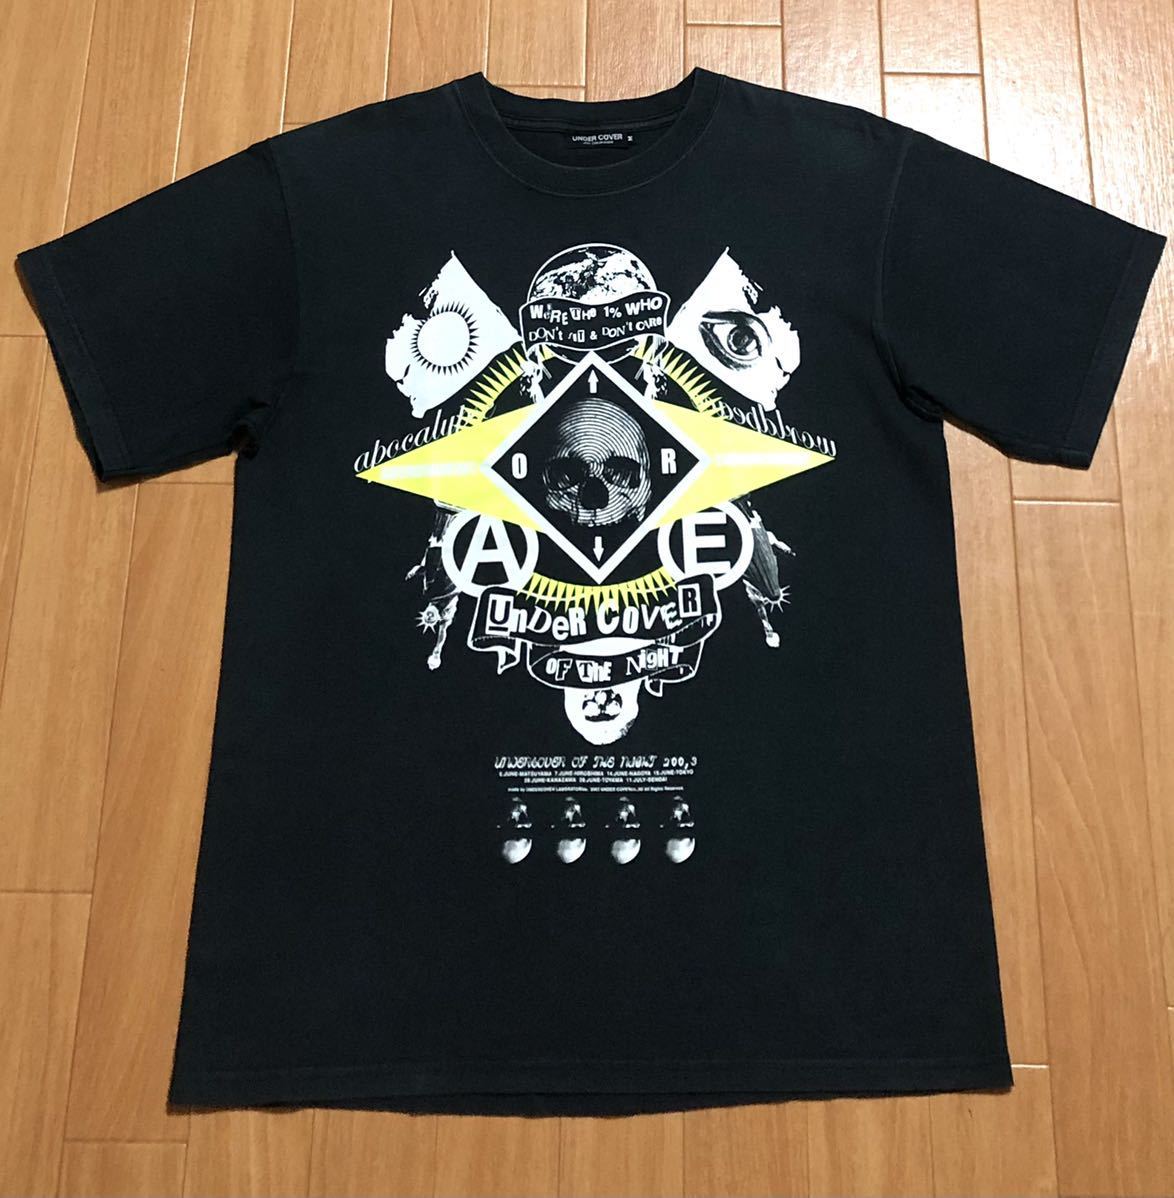 UNDERCOVER SCAB 上映会 Tシャツ GIZ柄 UNDERCOVER OF THE NIGHT 2003 アンダーカバー アナーキー